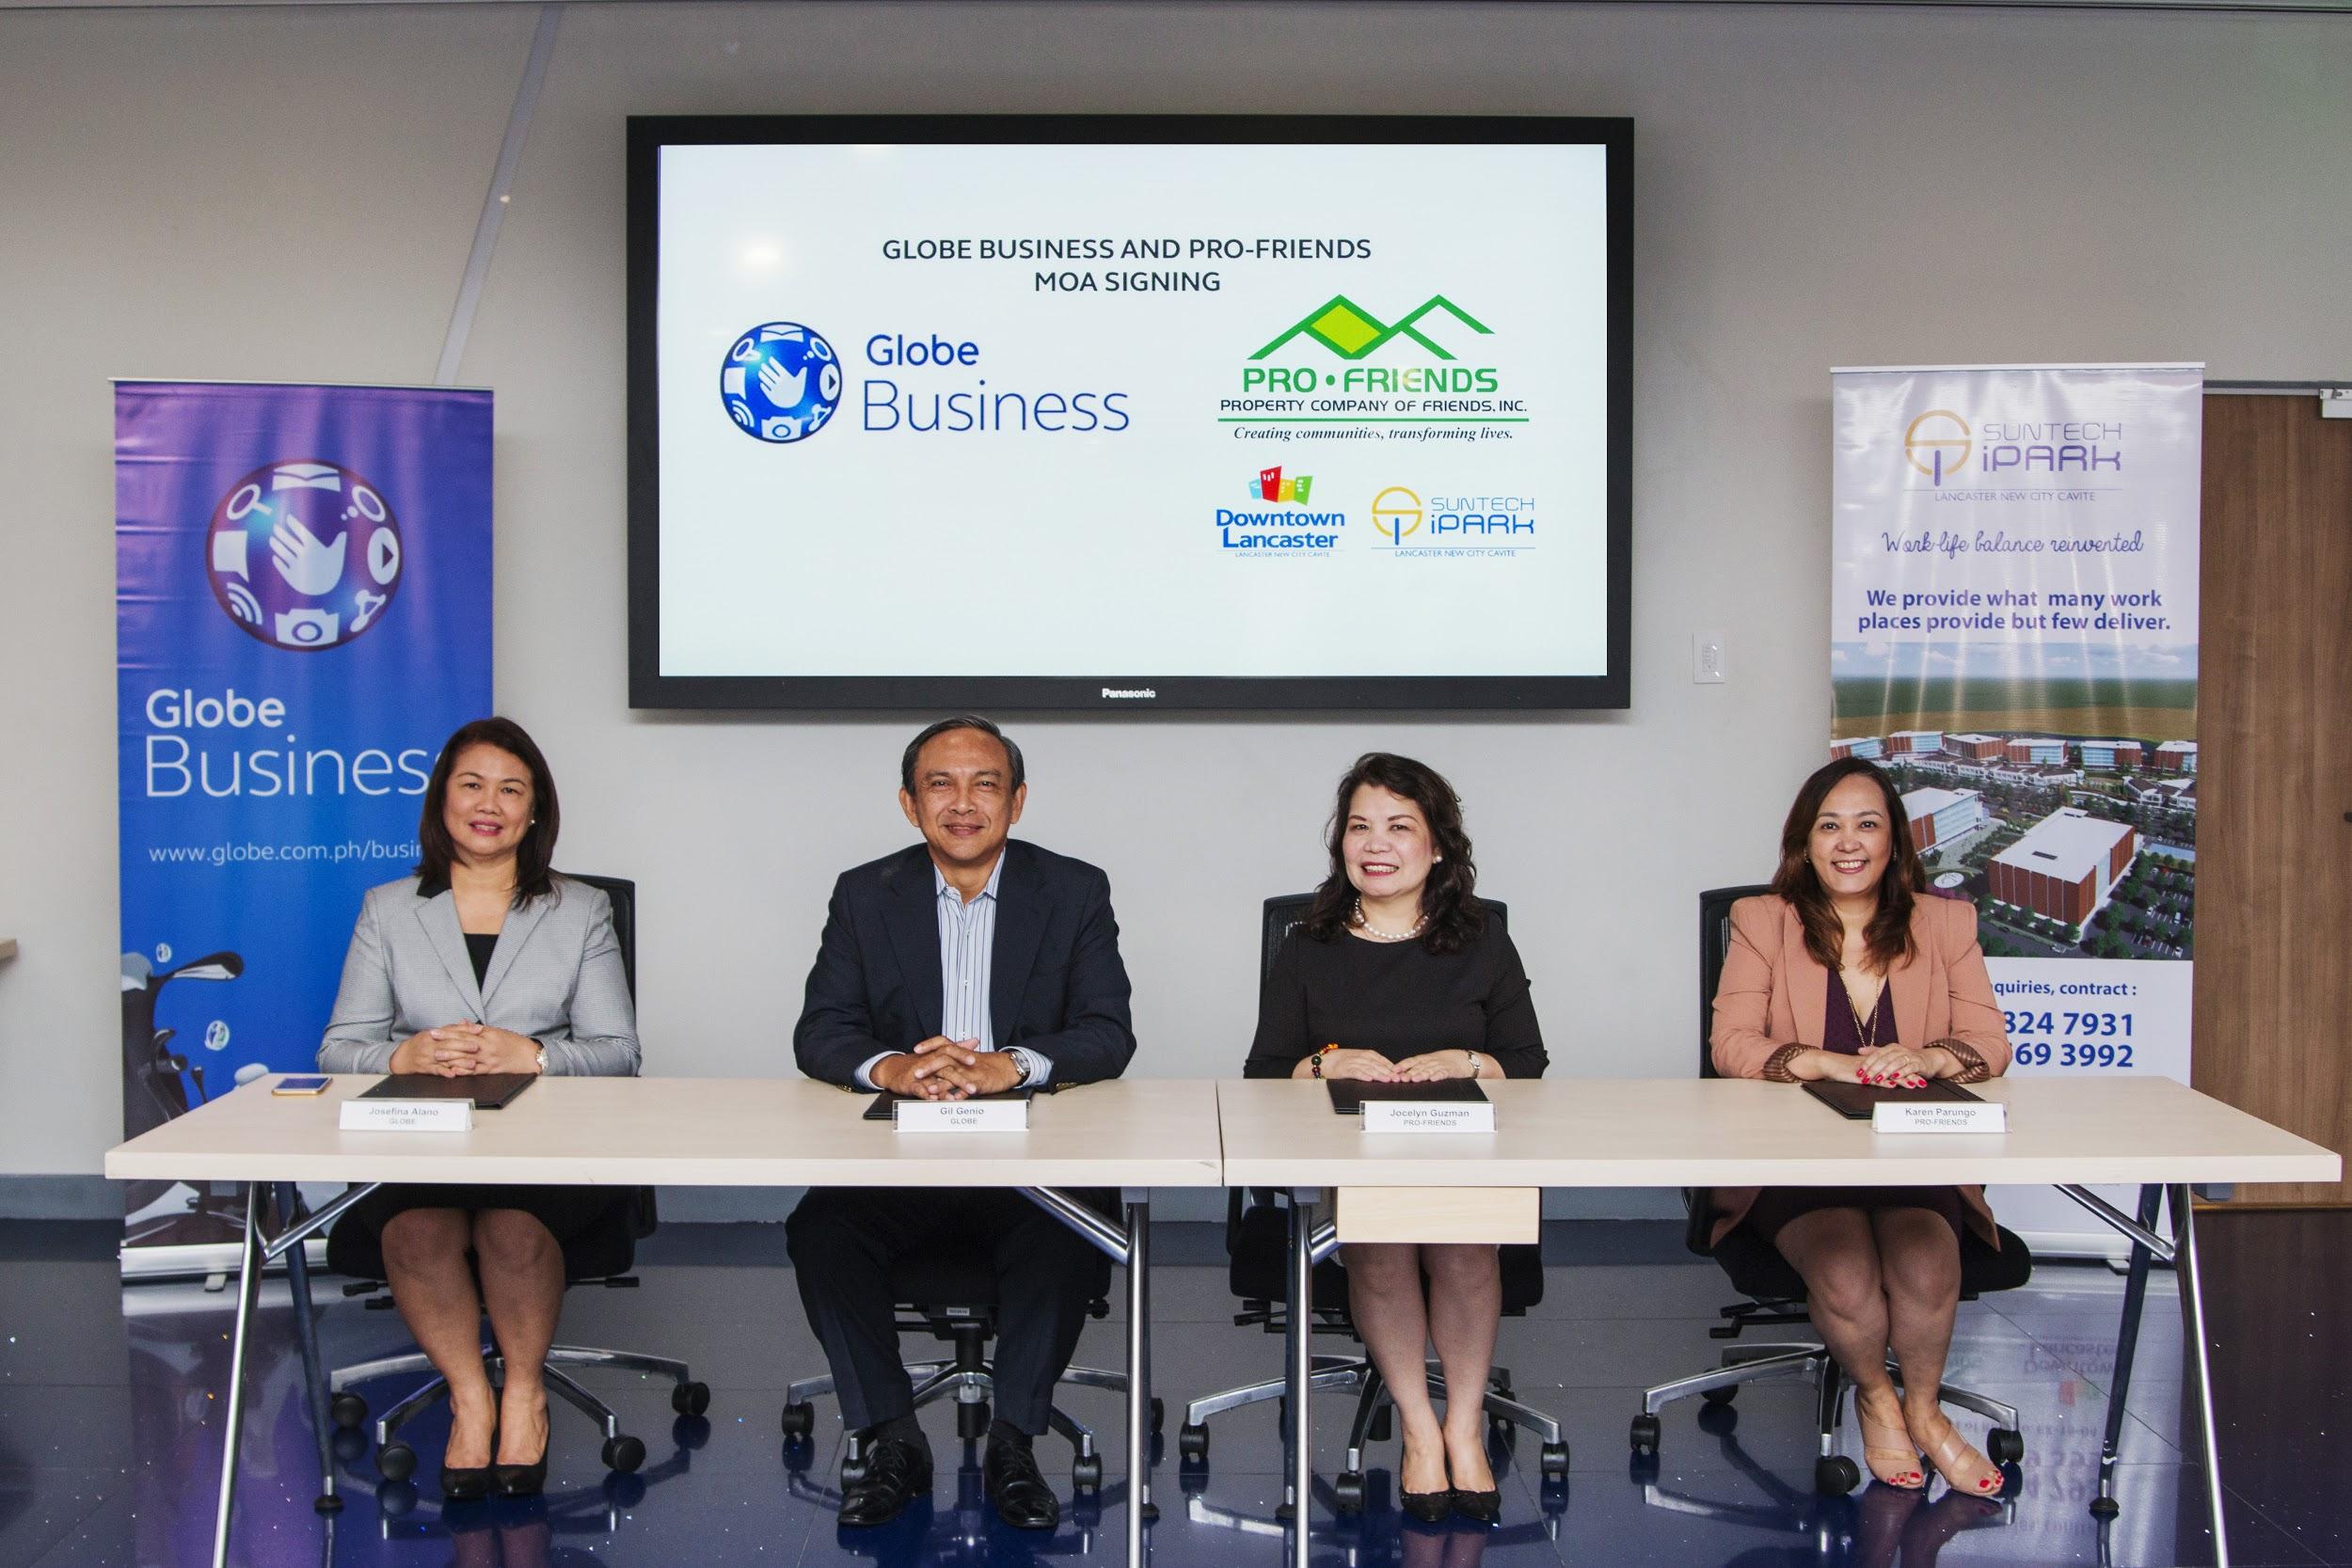 Formalizing the partnership between Globe and Pro-Friends are Globe Chief Technology and Information Officer Gil Genio (2nd from the left) and Pro-Friends Senior Executive Vice President Jocelyn Guzman (3rd from the left). With them are Pro-Friends New Projects Development Head Jessie Alano (leftmost) and Pro-Friends Vice President for Commercial and Retail Development Karen Parungo (rightmost).